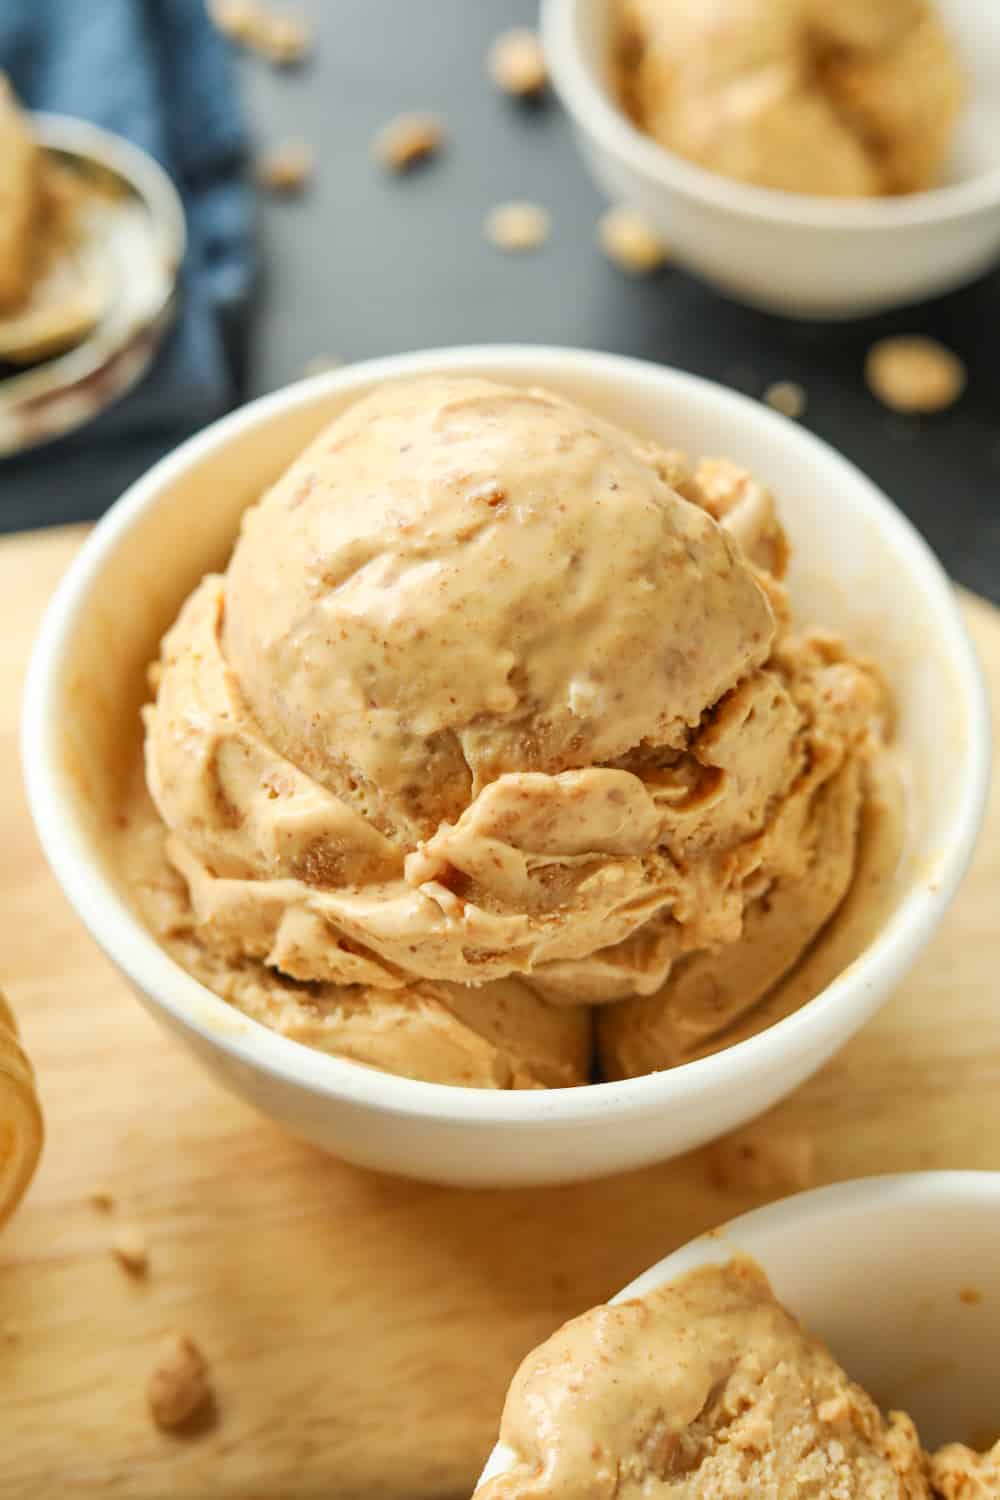 A white bowl filled with peanut butter ice cream. The bowl is on a wooden cutting board.